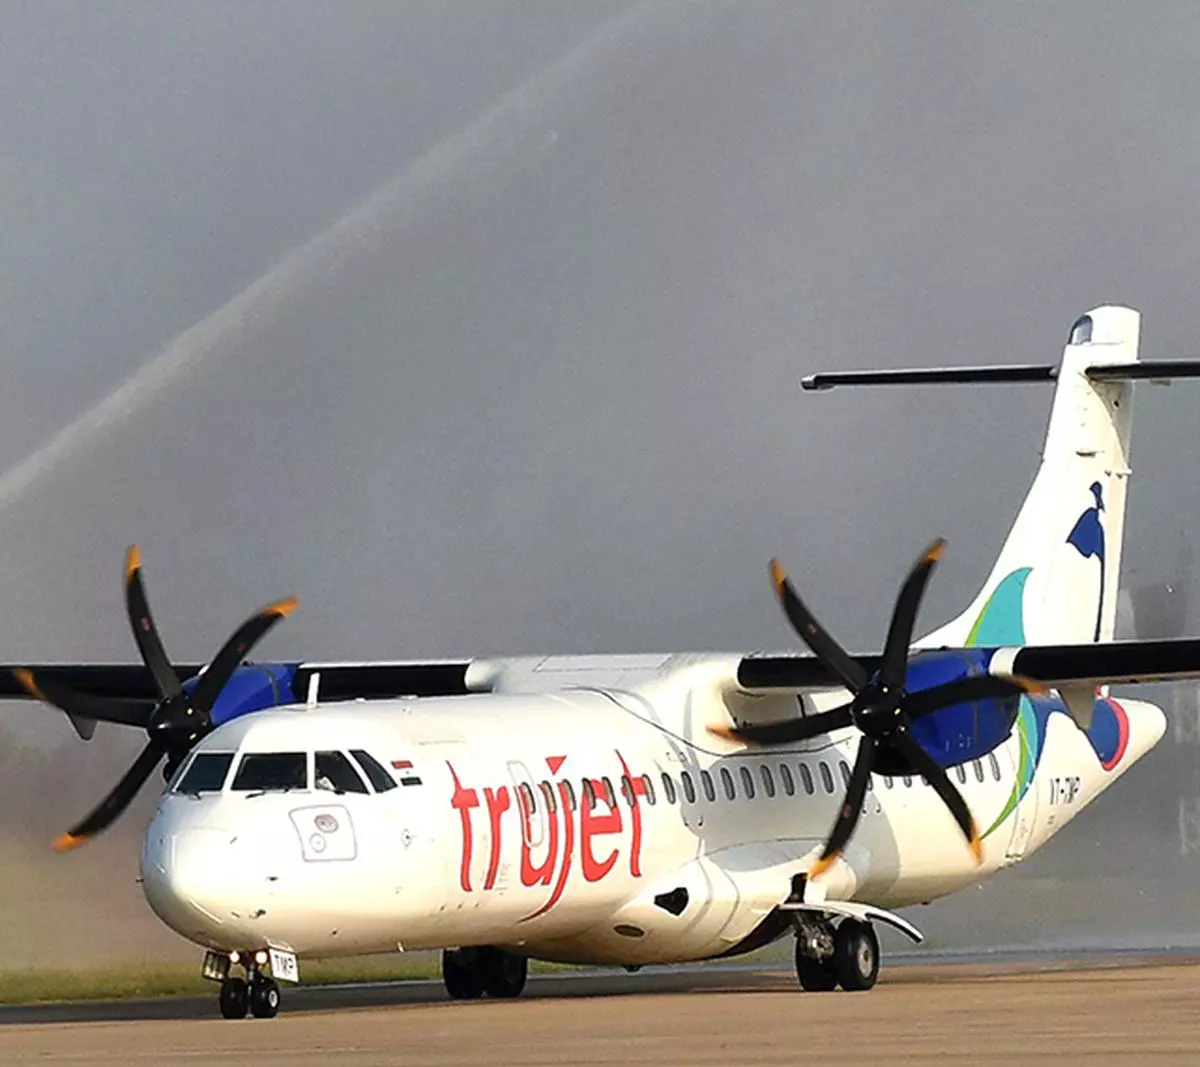 All aircraft of TruJet grounded; CEO, CFO and CCO quit the company - The Hindu BusinessLine